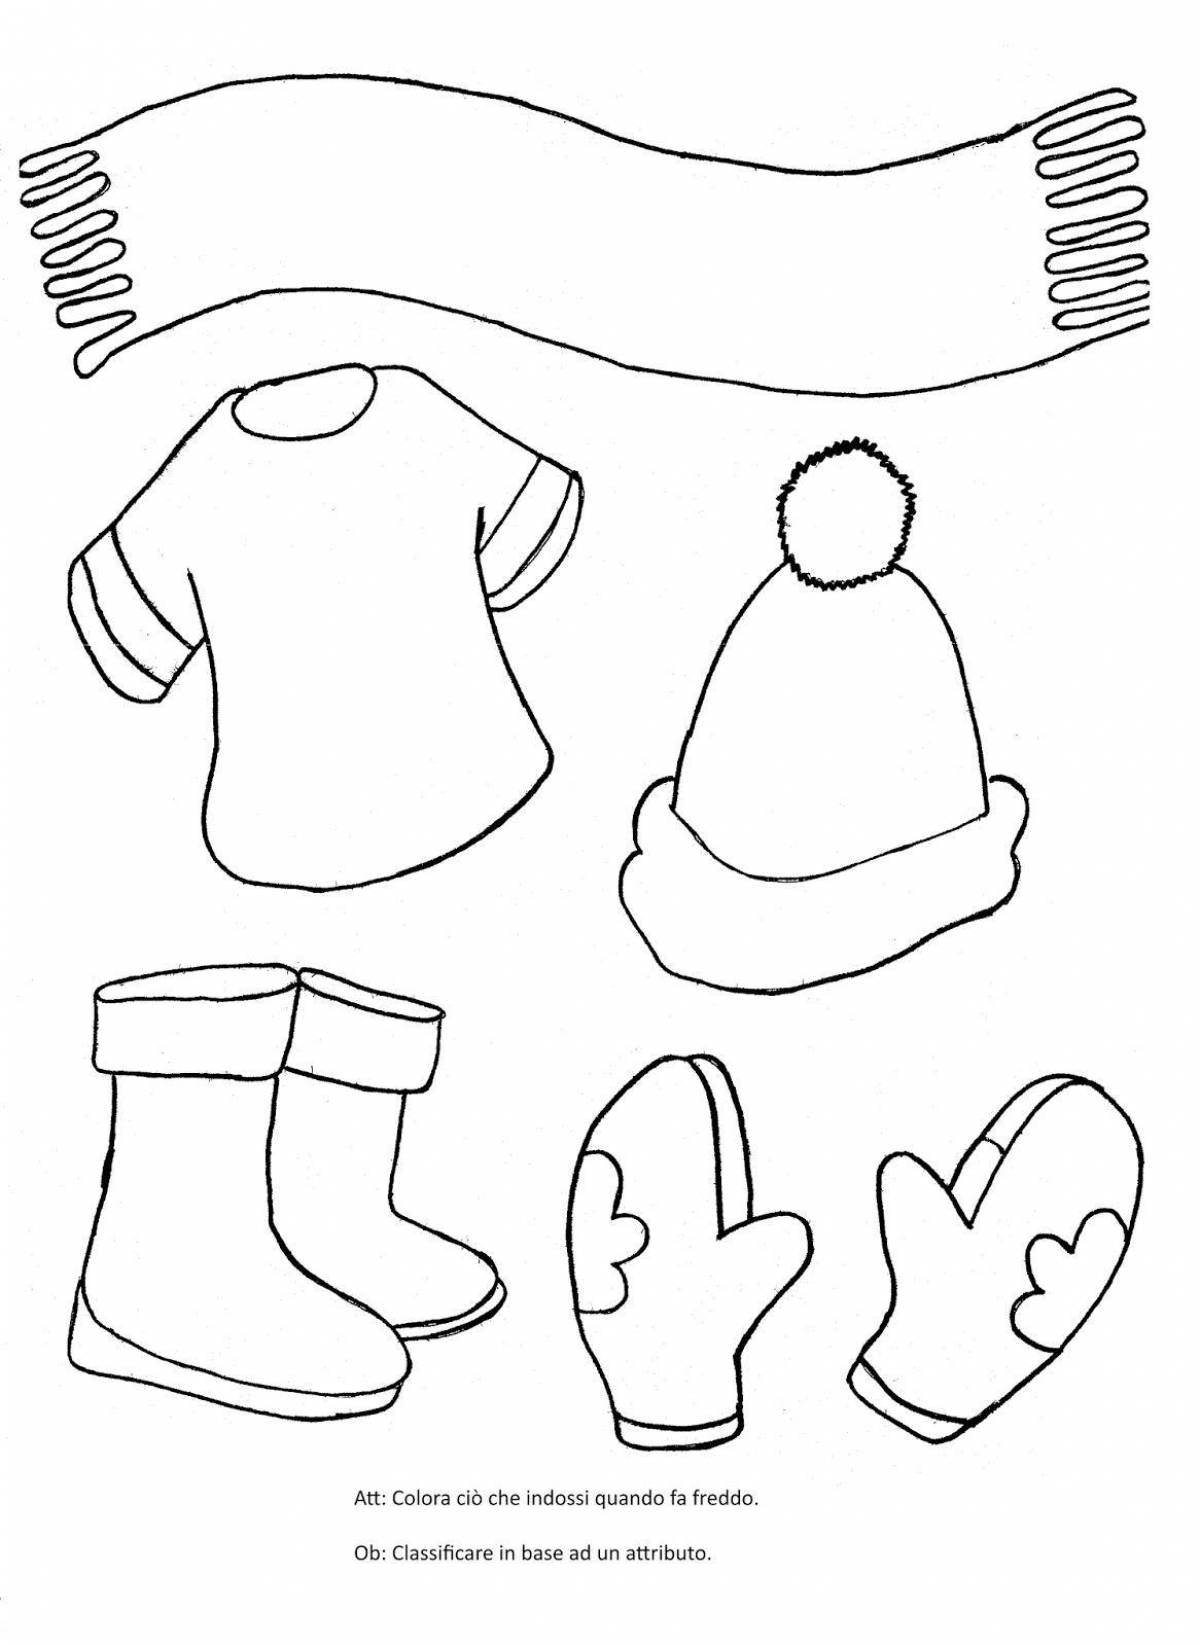 Great hat and gloves coloring page